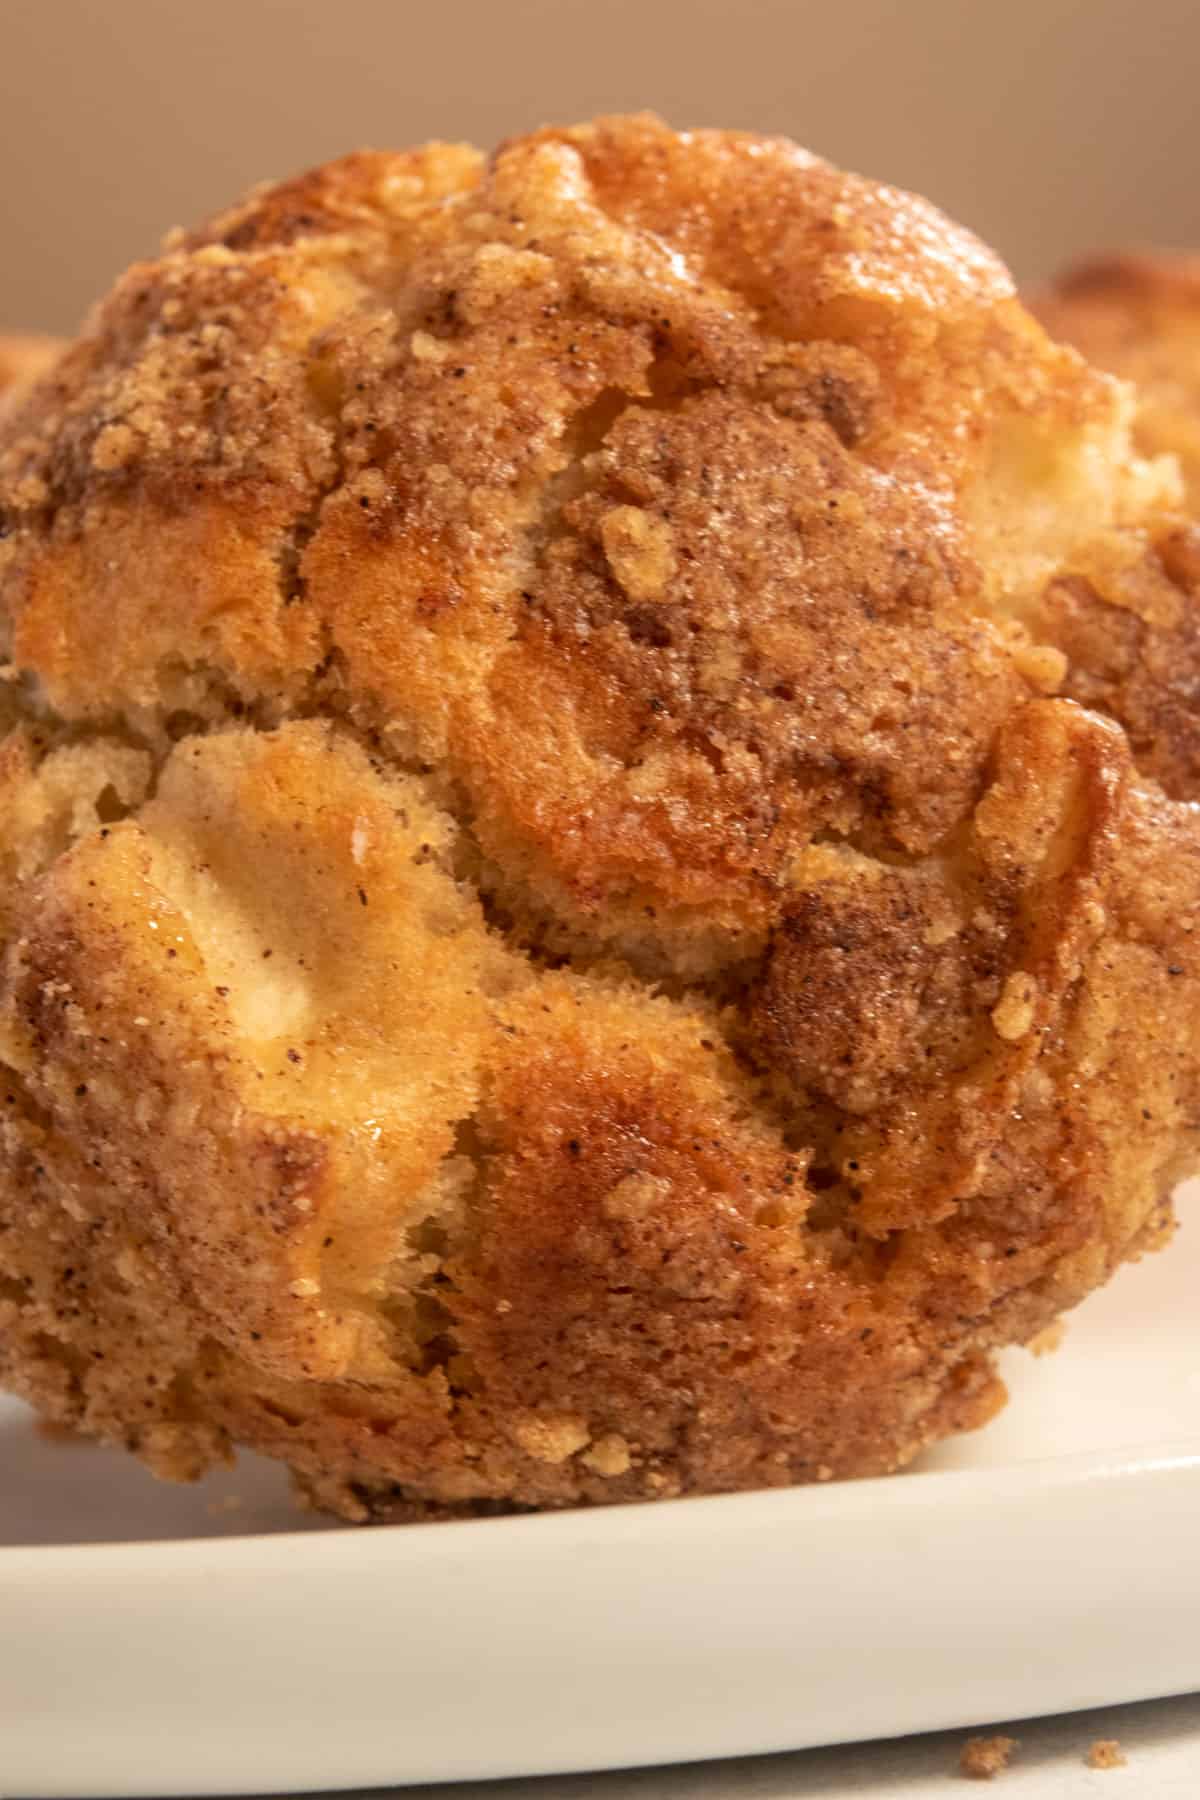 A larger apple muffin has been tipped onto its side. It looks very crumbly. 